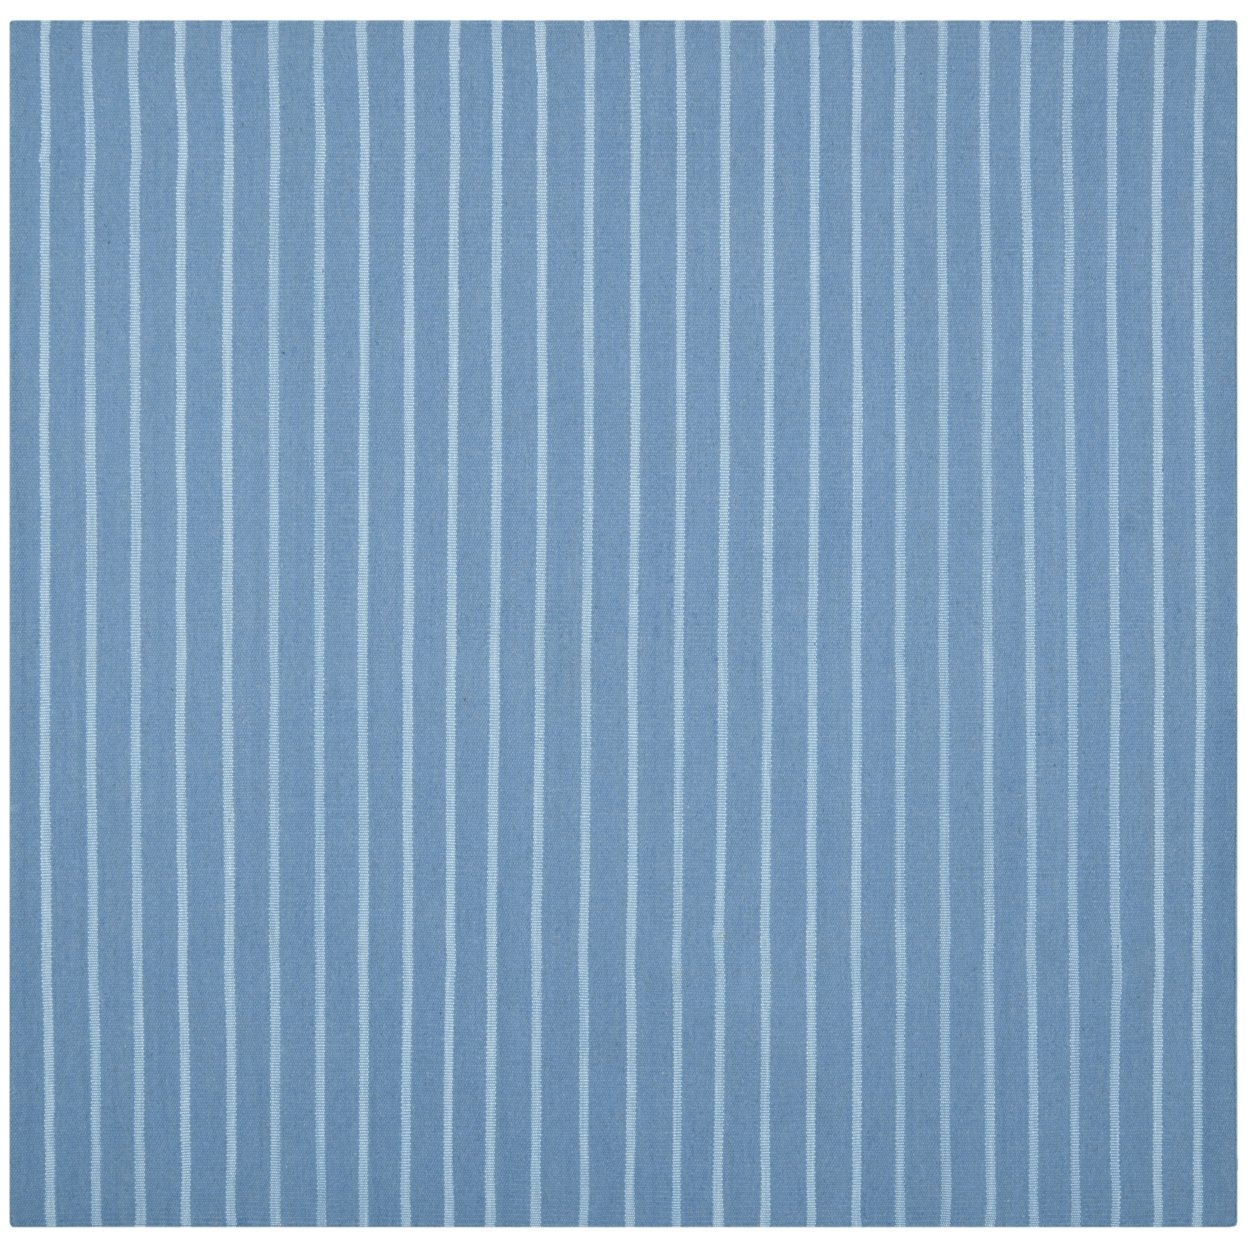 SAFAVIEH Dhurries Collection DHU313A Handwoven Blue Rug - 6' Square